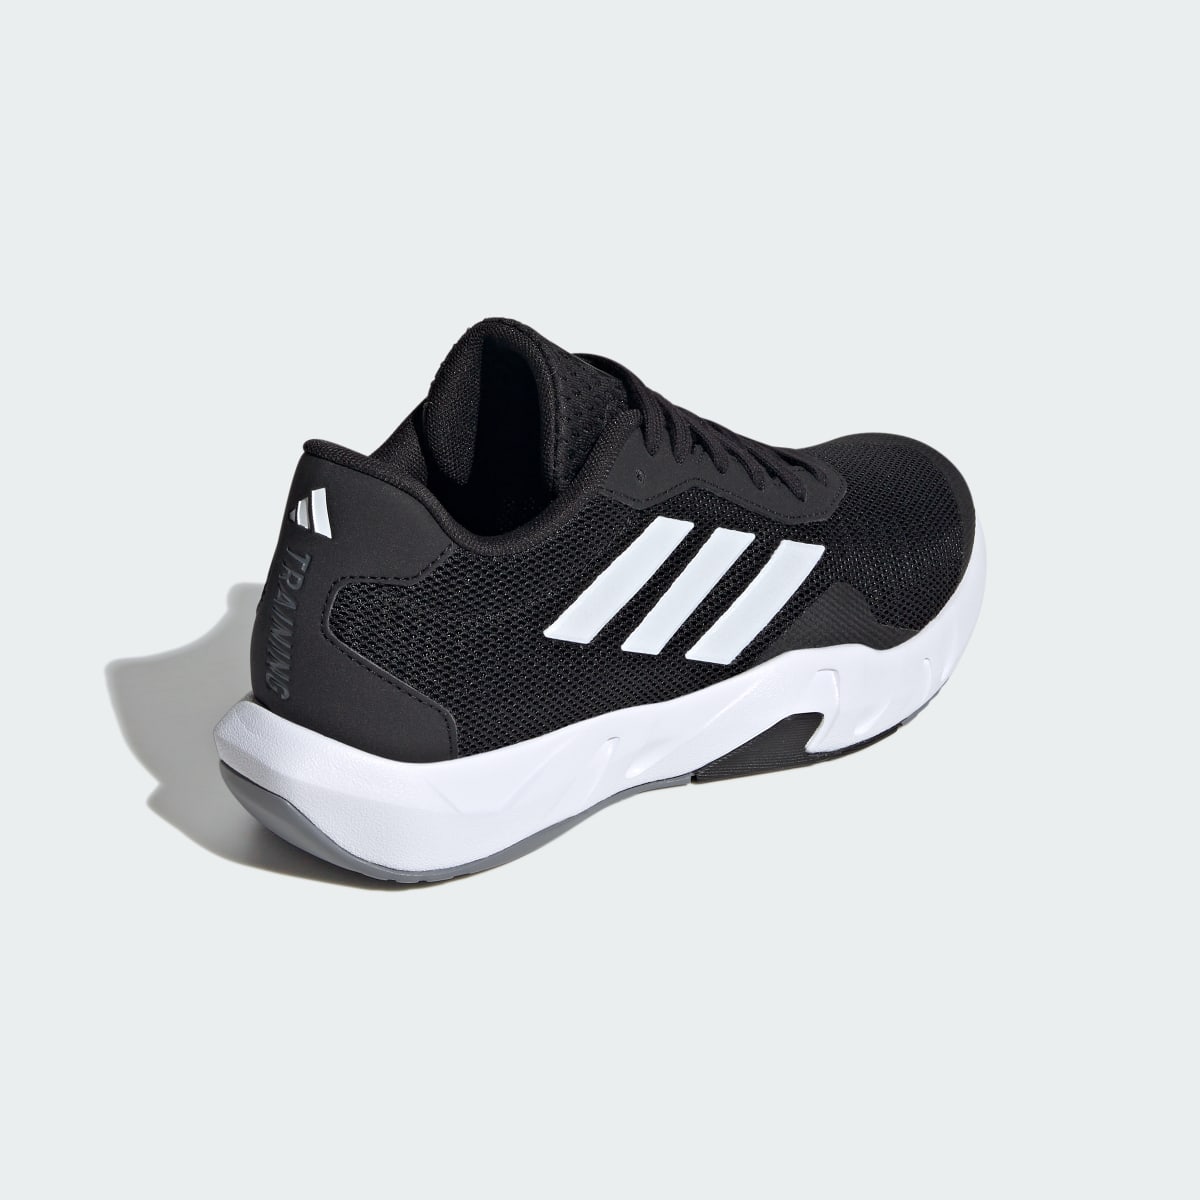 Adidas Amplimove Trainer Shoes. 6